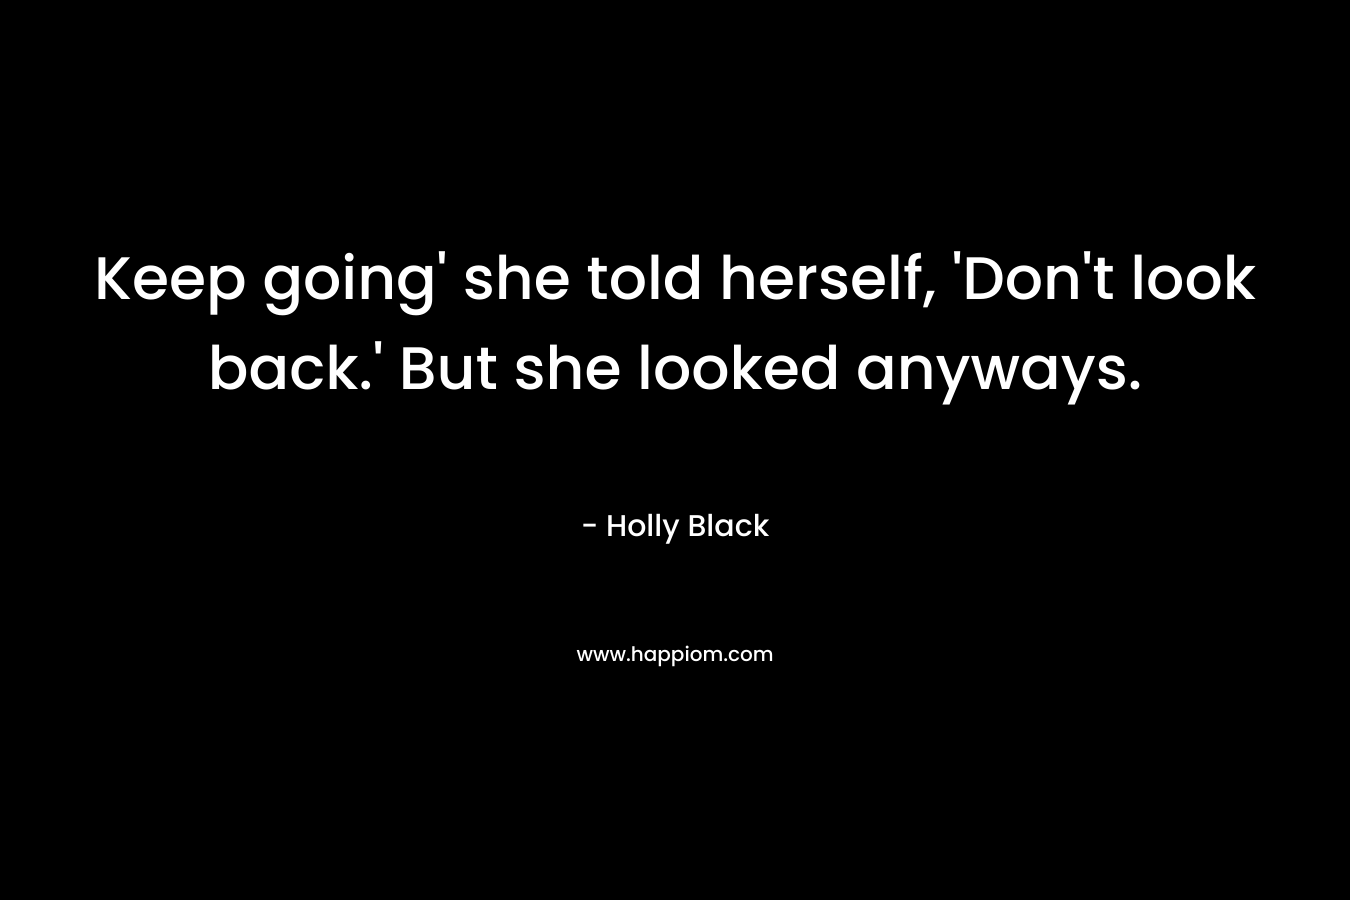 Keep going’ she told herself, ‘Don’t look back.’ But she looked anyways. – Holly Black